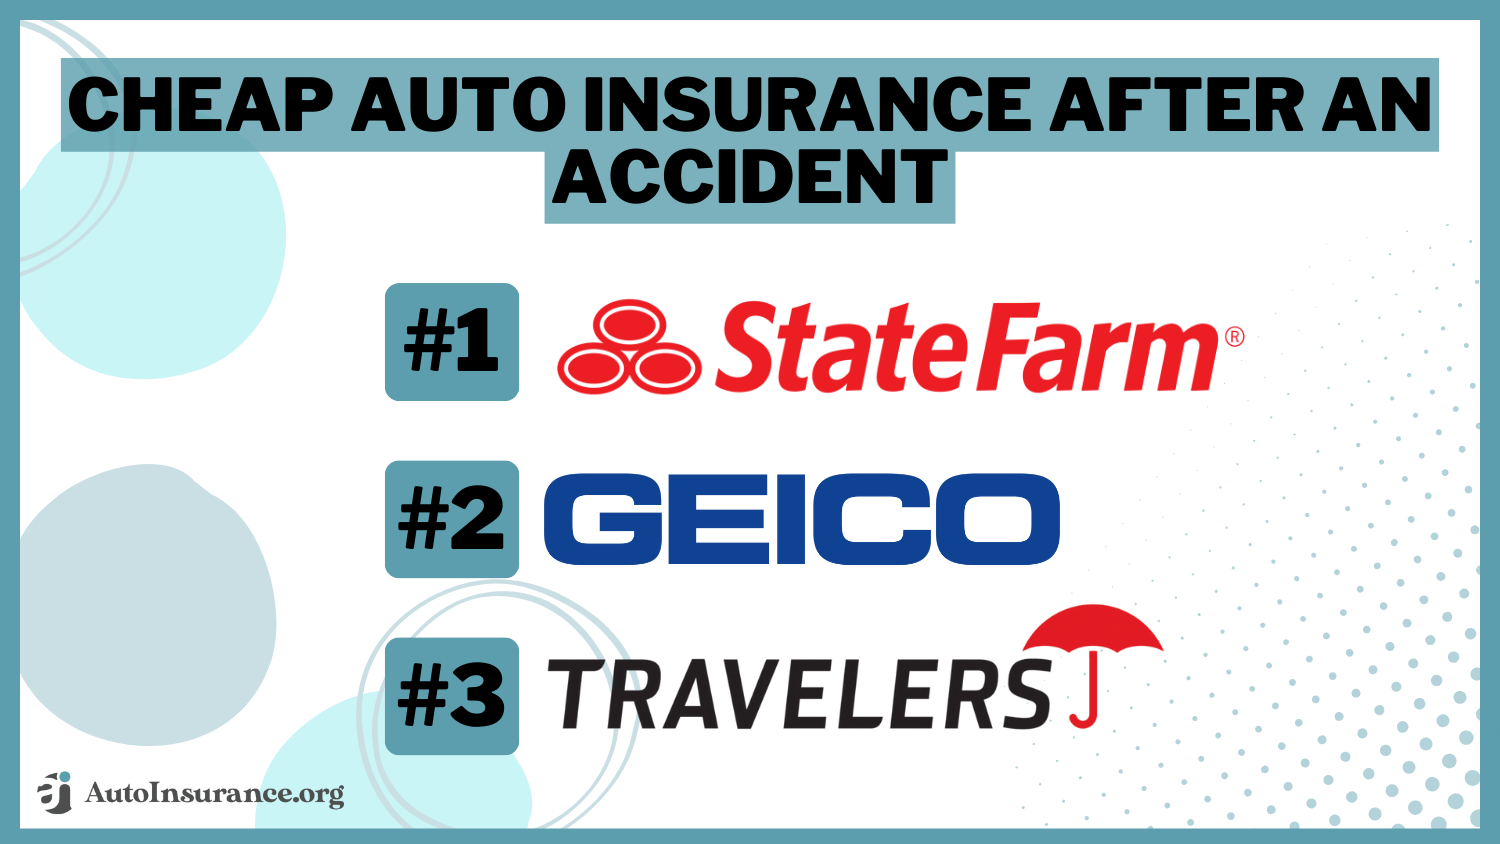 State Farm, Geico, Travelers: cheap auto insurance after an accident